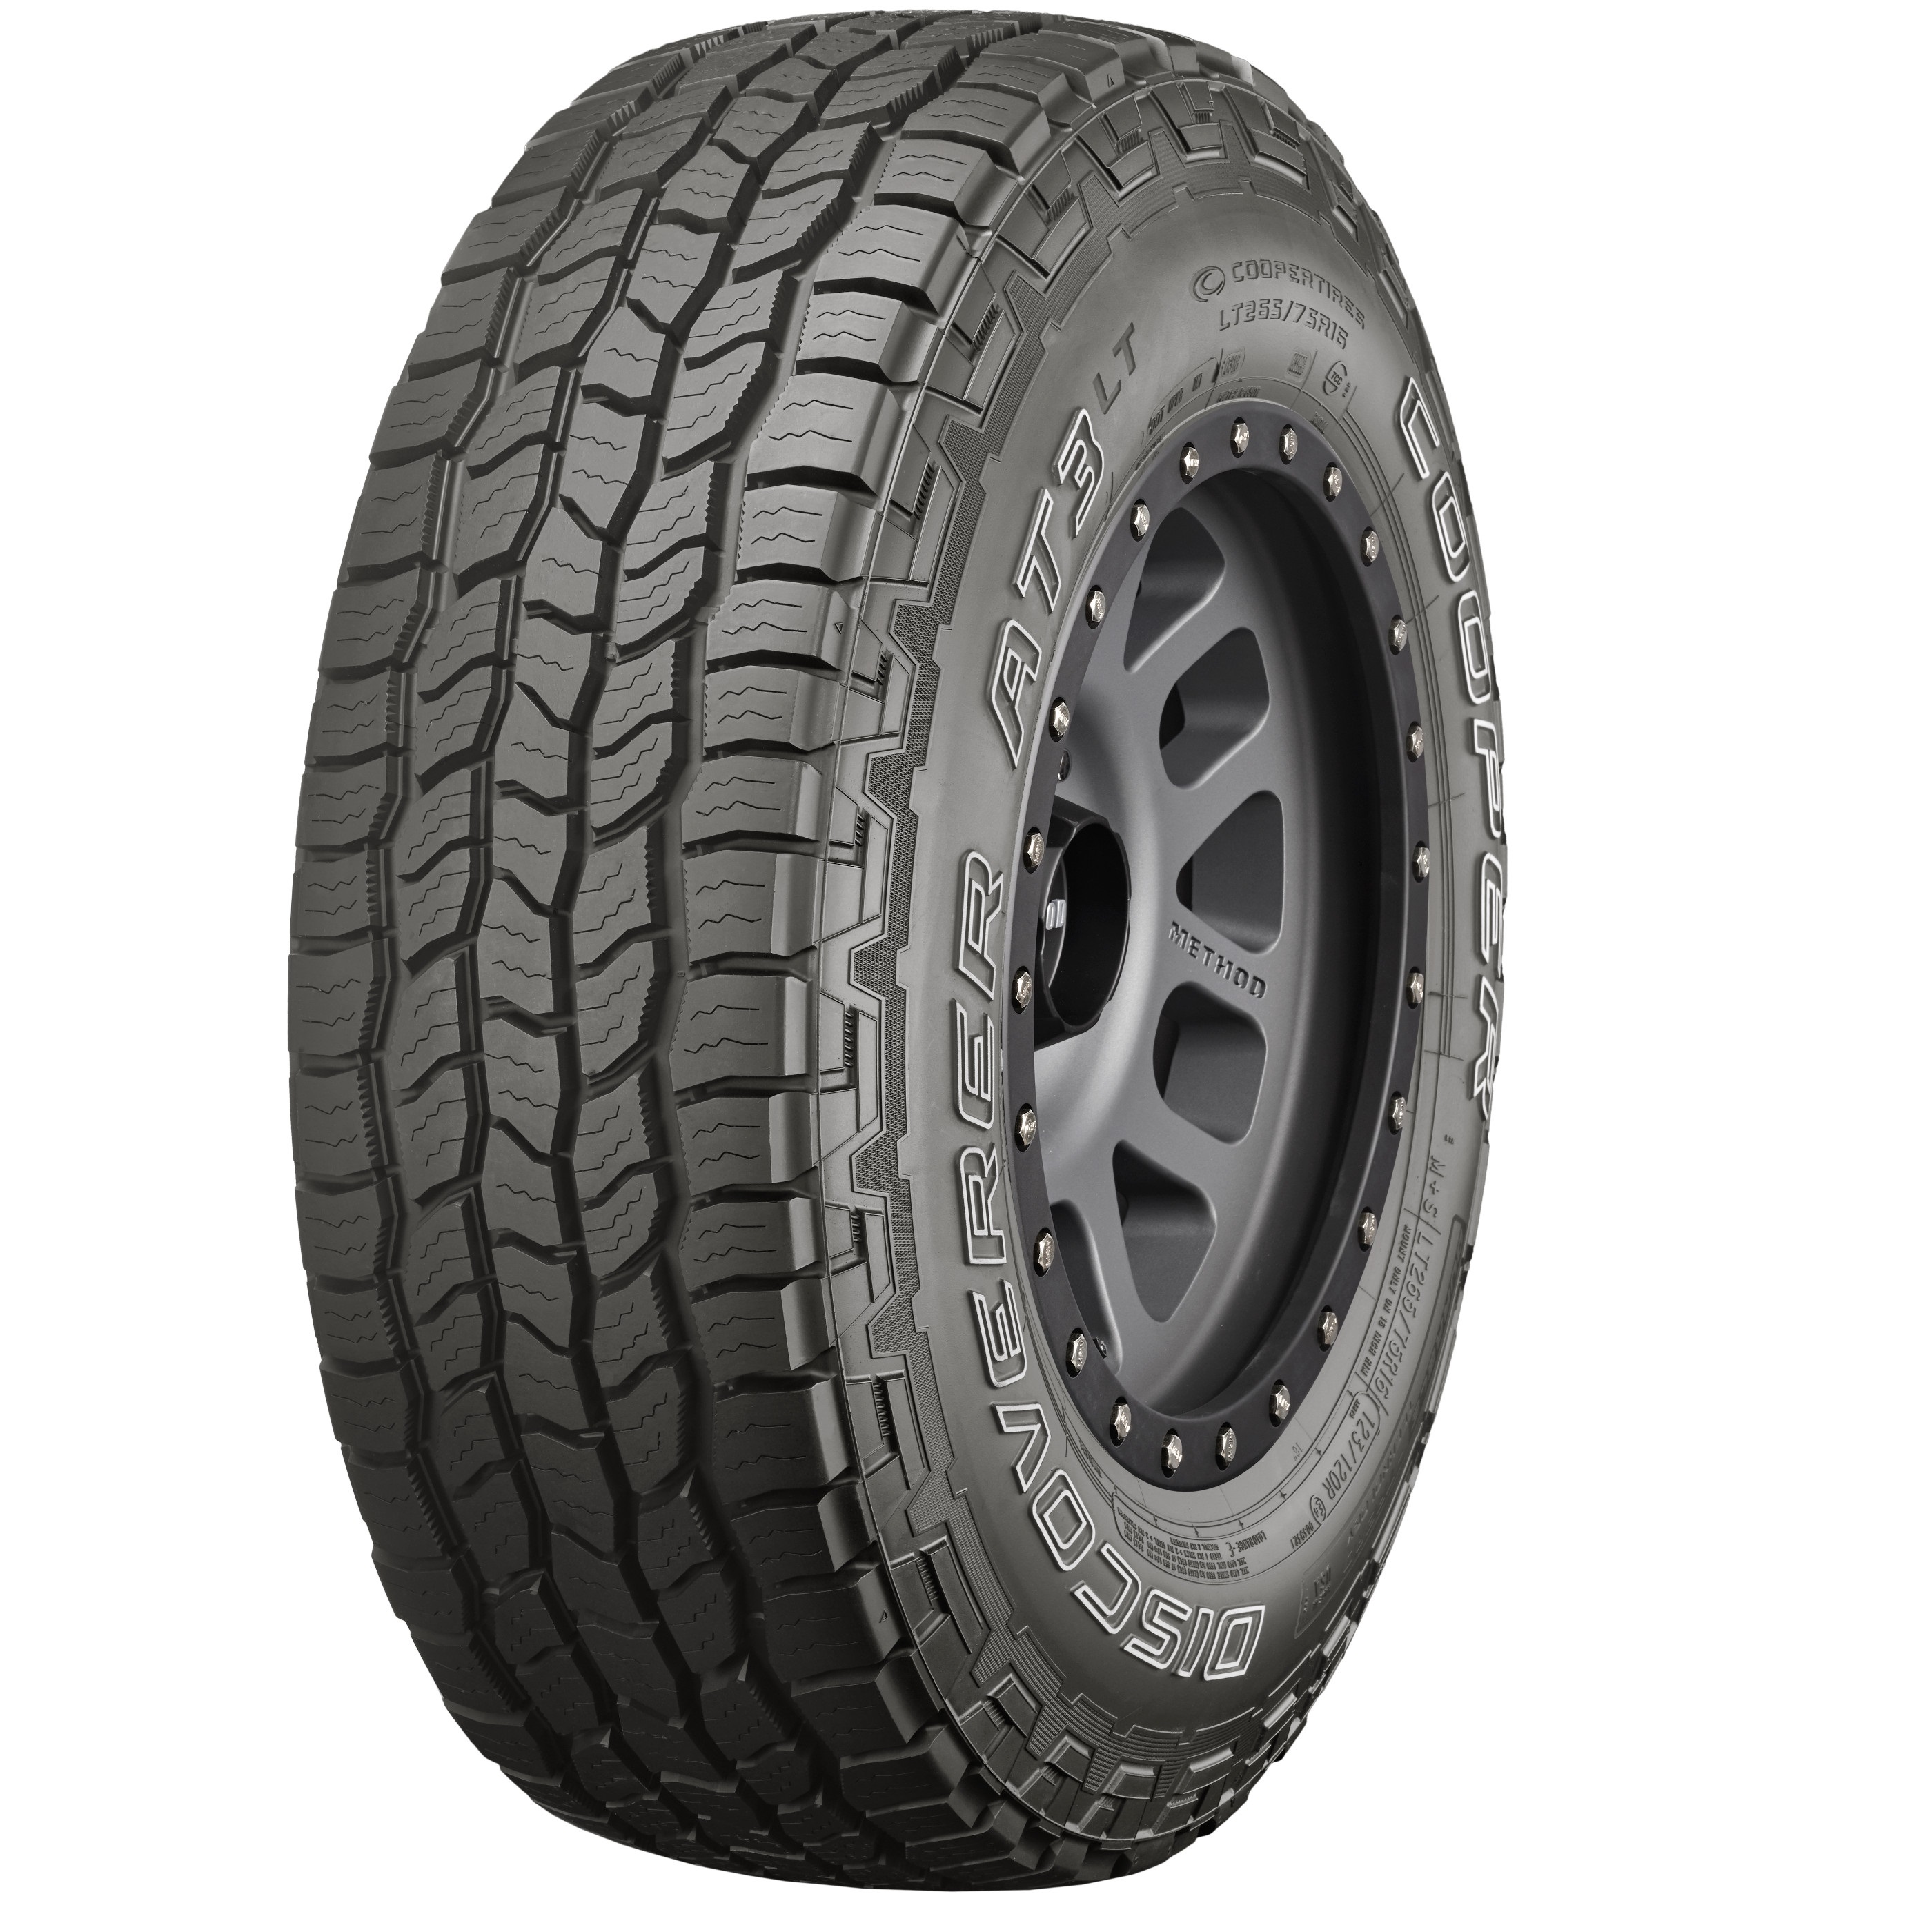 Tyres Cooper 245/75/16 DISCOVERER A/T3 120R for SUV/4x4